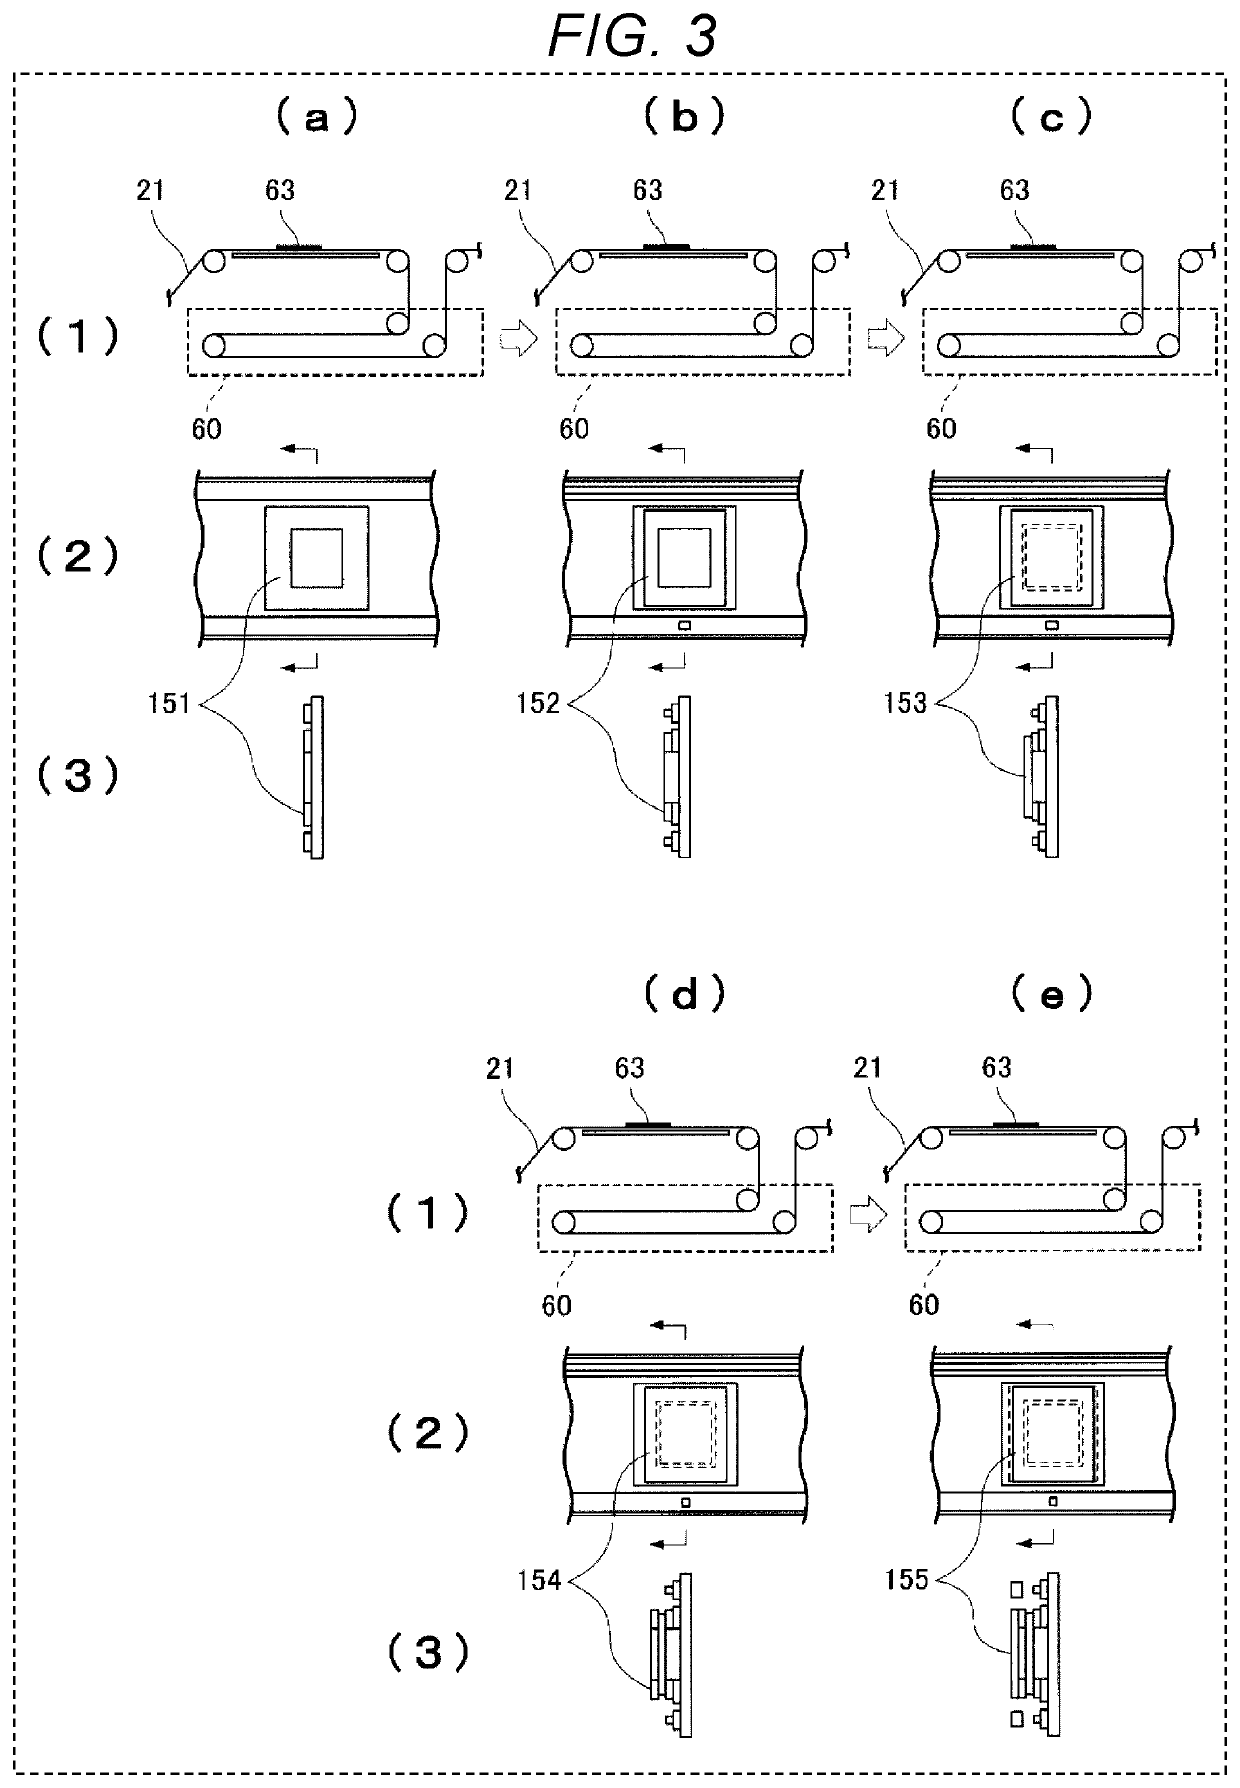 Method of manufacturing in-mold decorative molded article